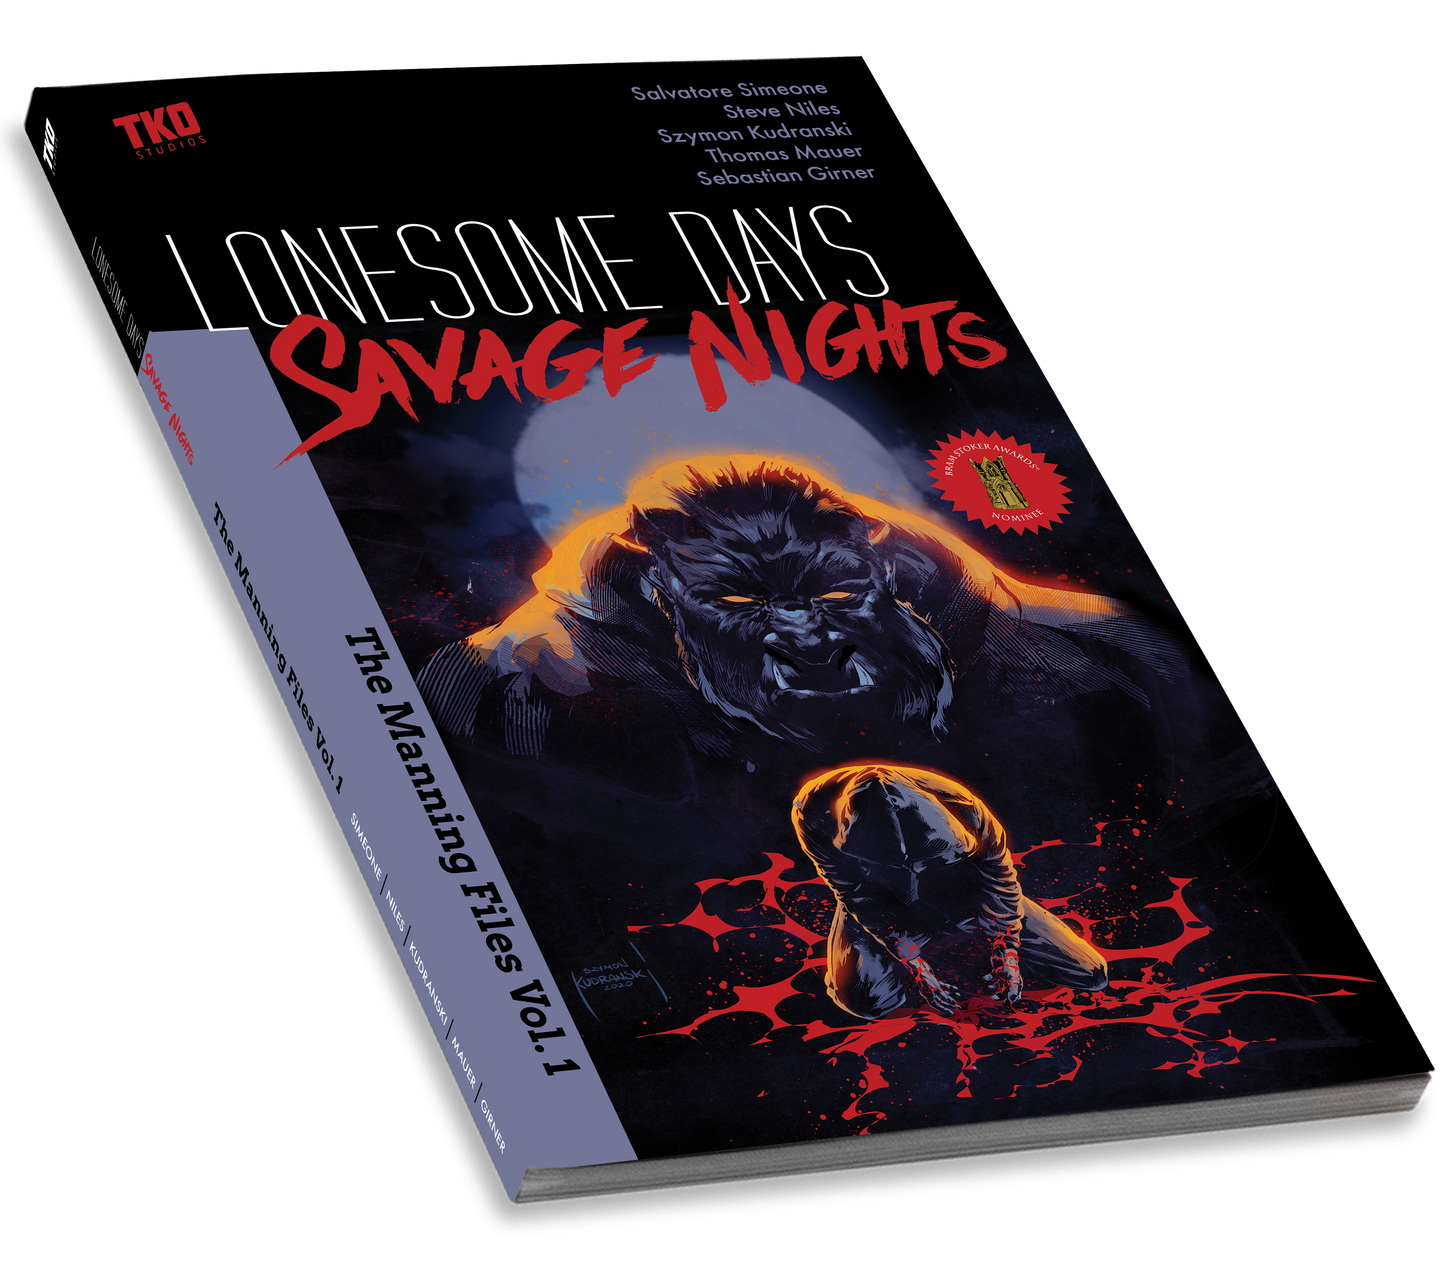 Lonesome Days, Savage Nights: The Manning Files Vol. 1